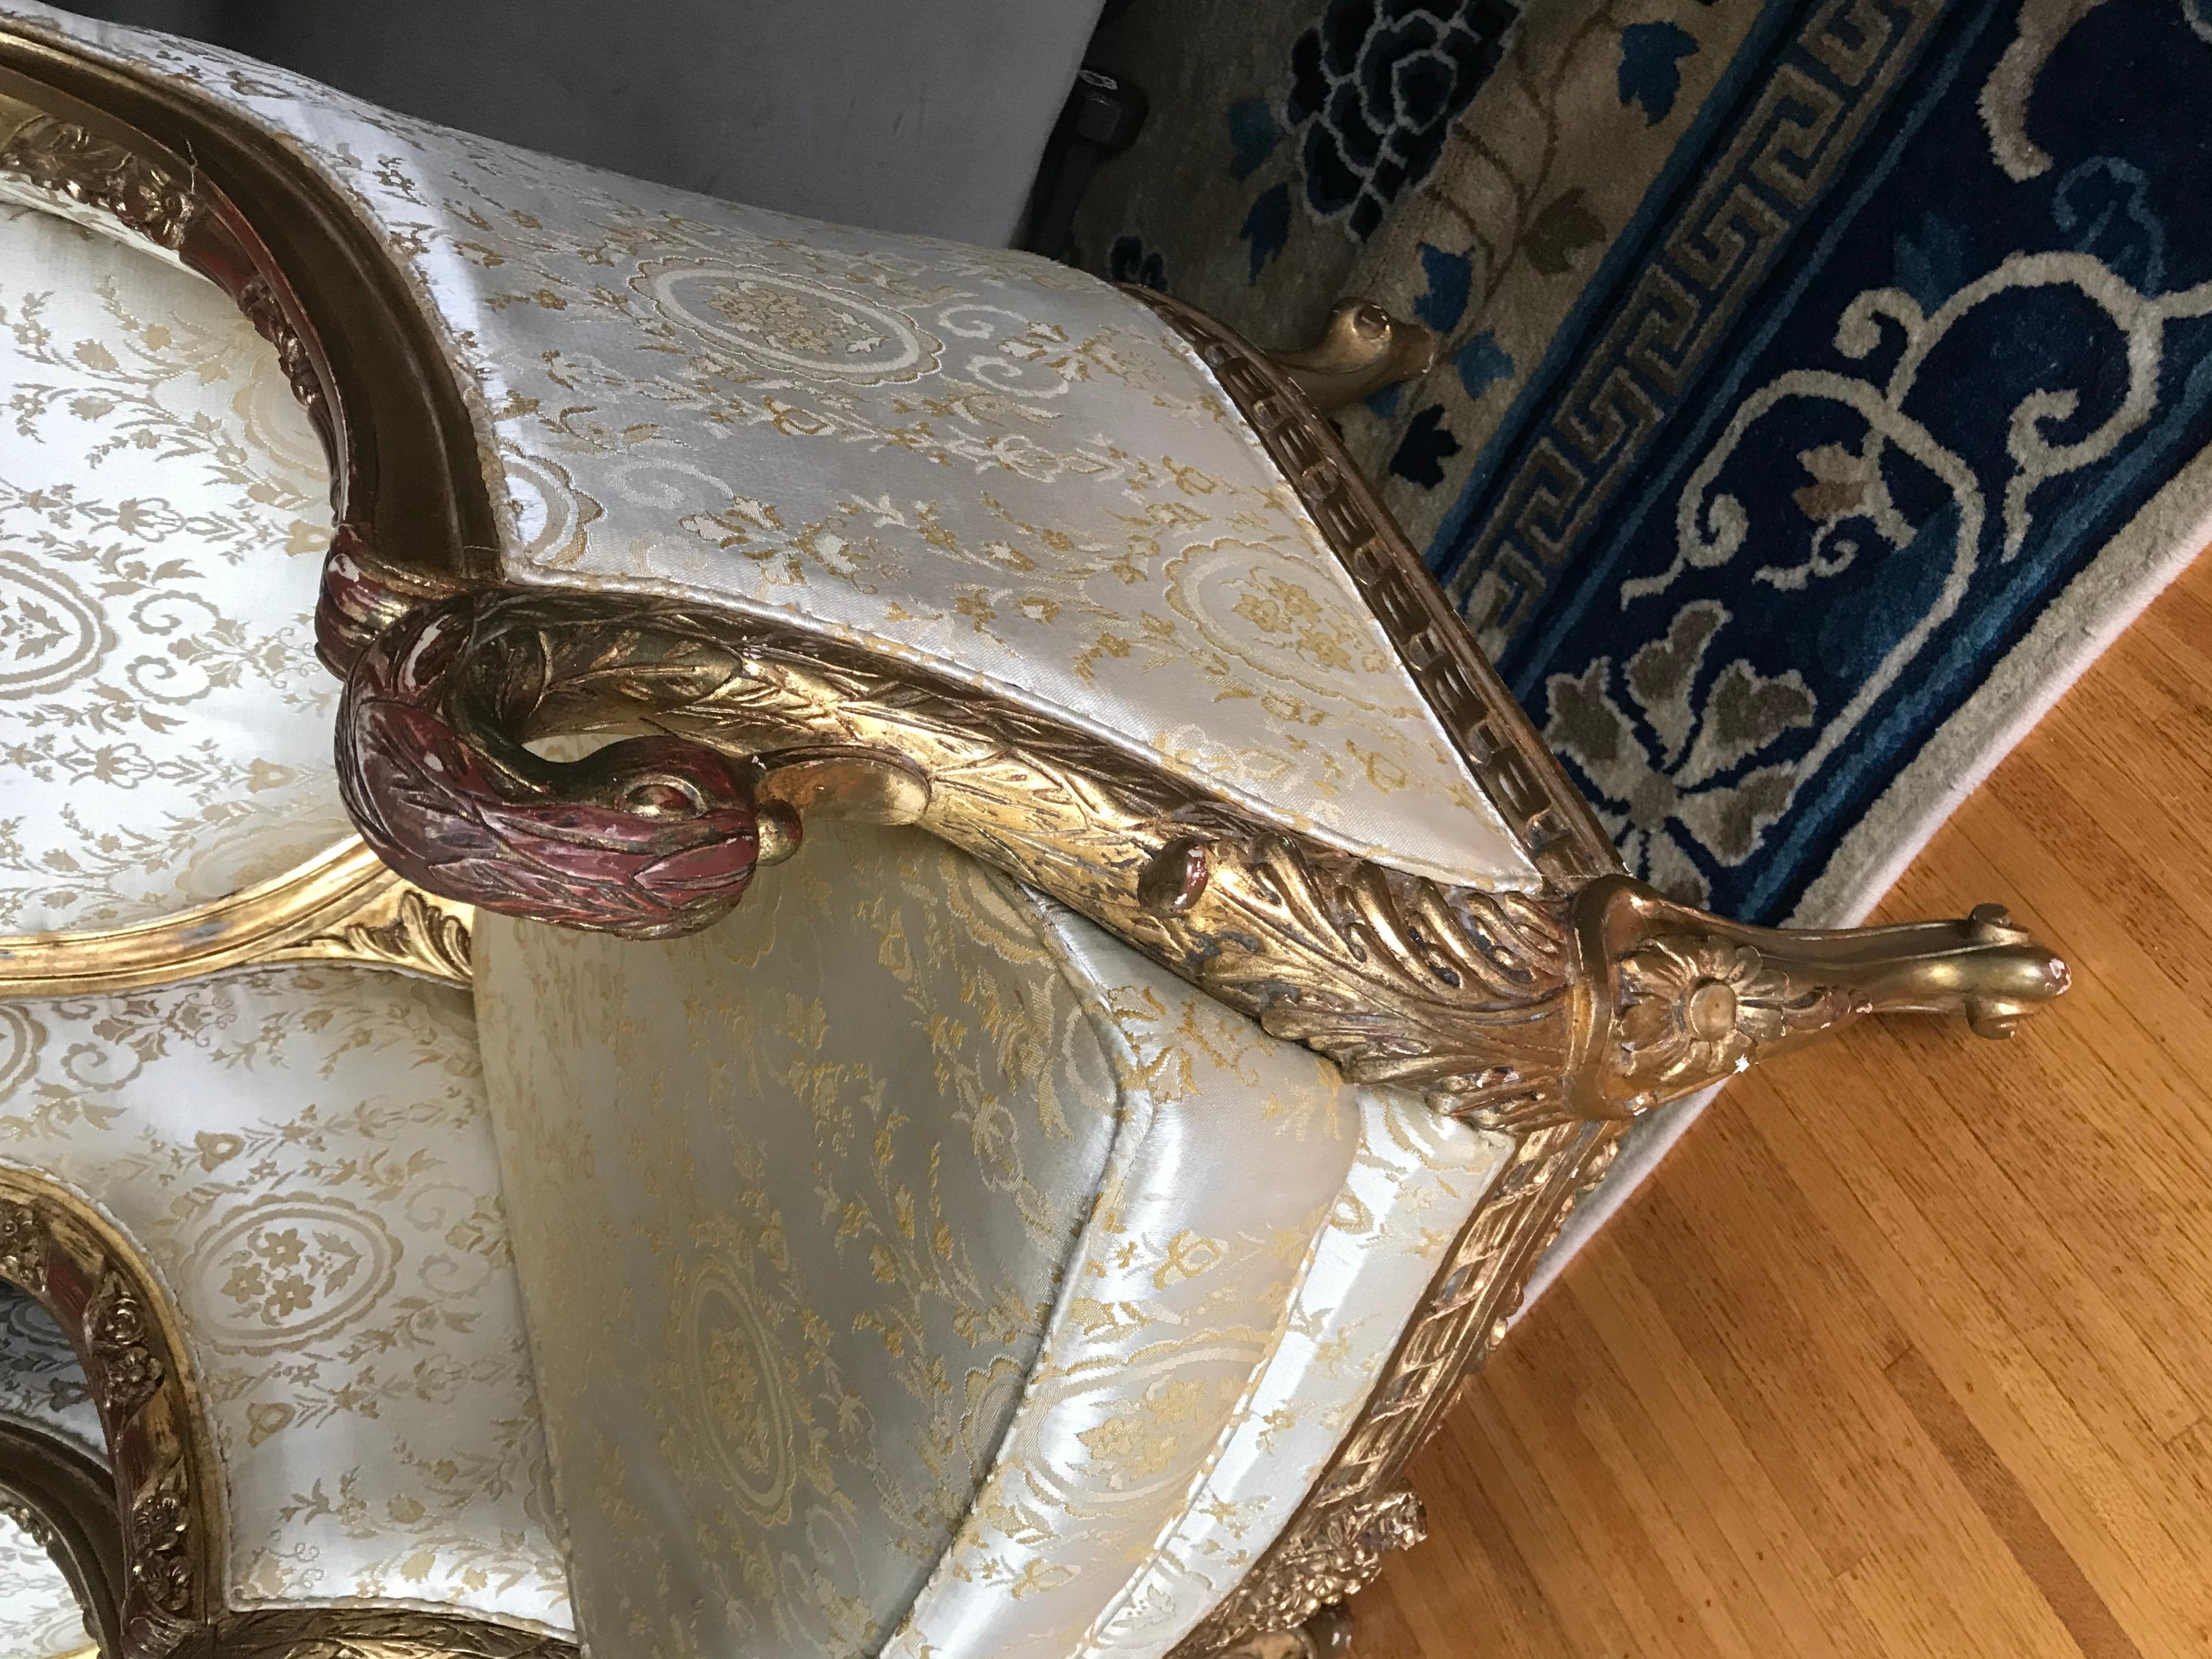 Romantic Pair of European Gold Gesso Upholstered Art Chairs, 19th Century For Sale